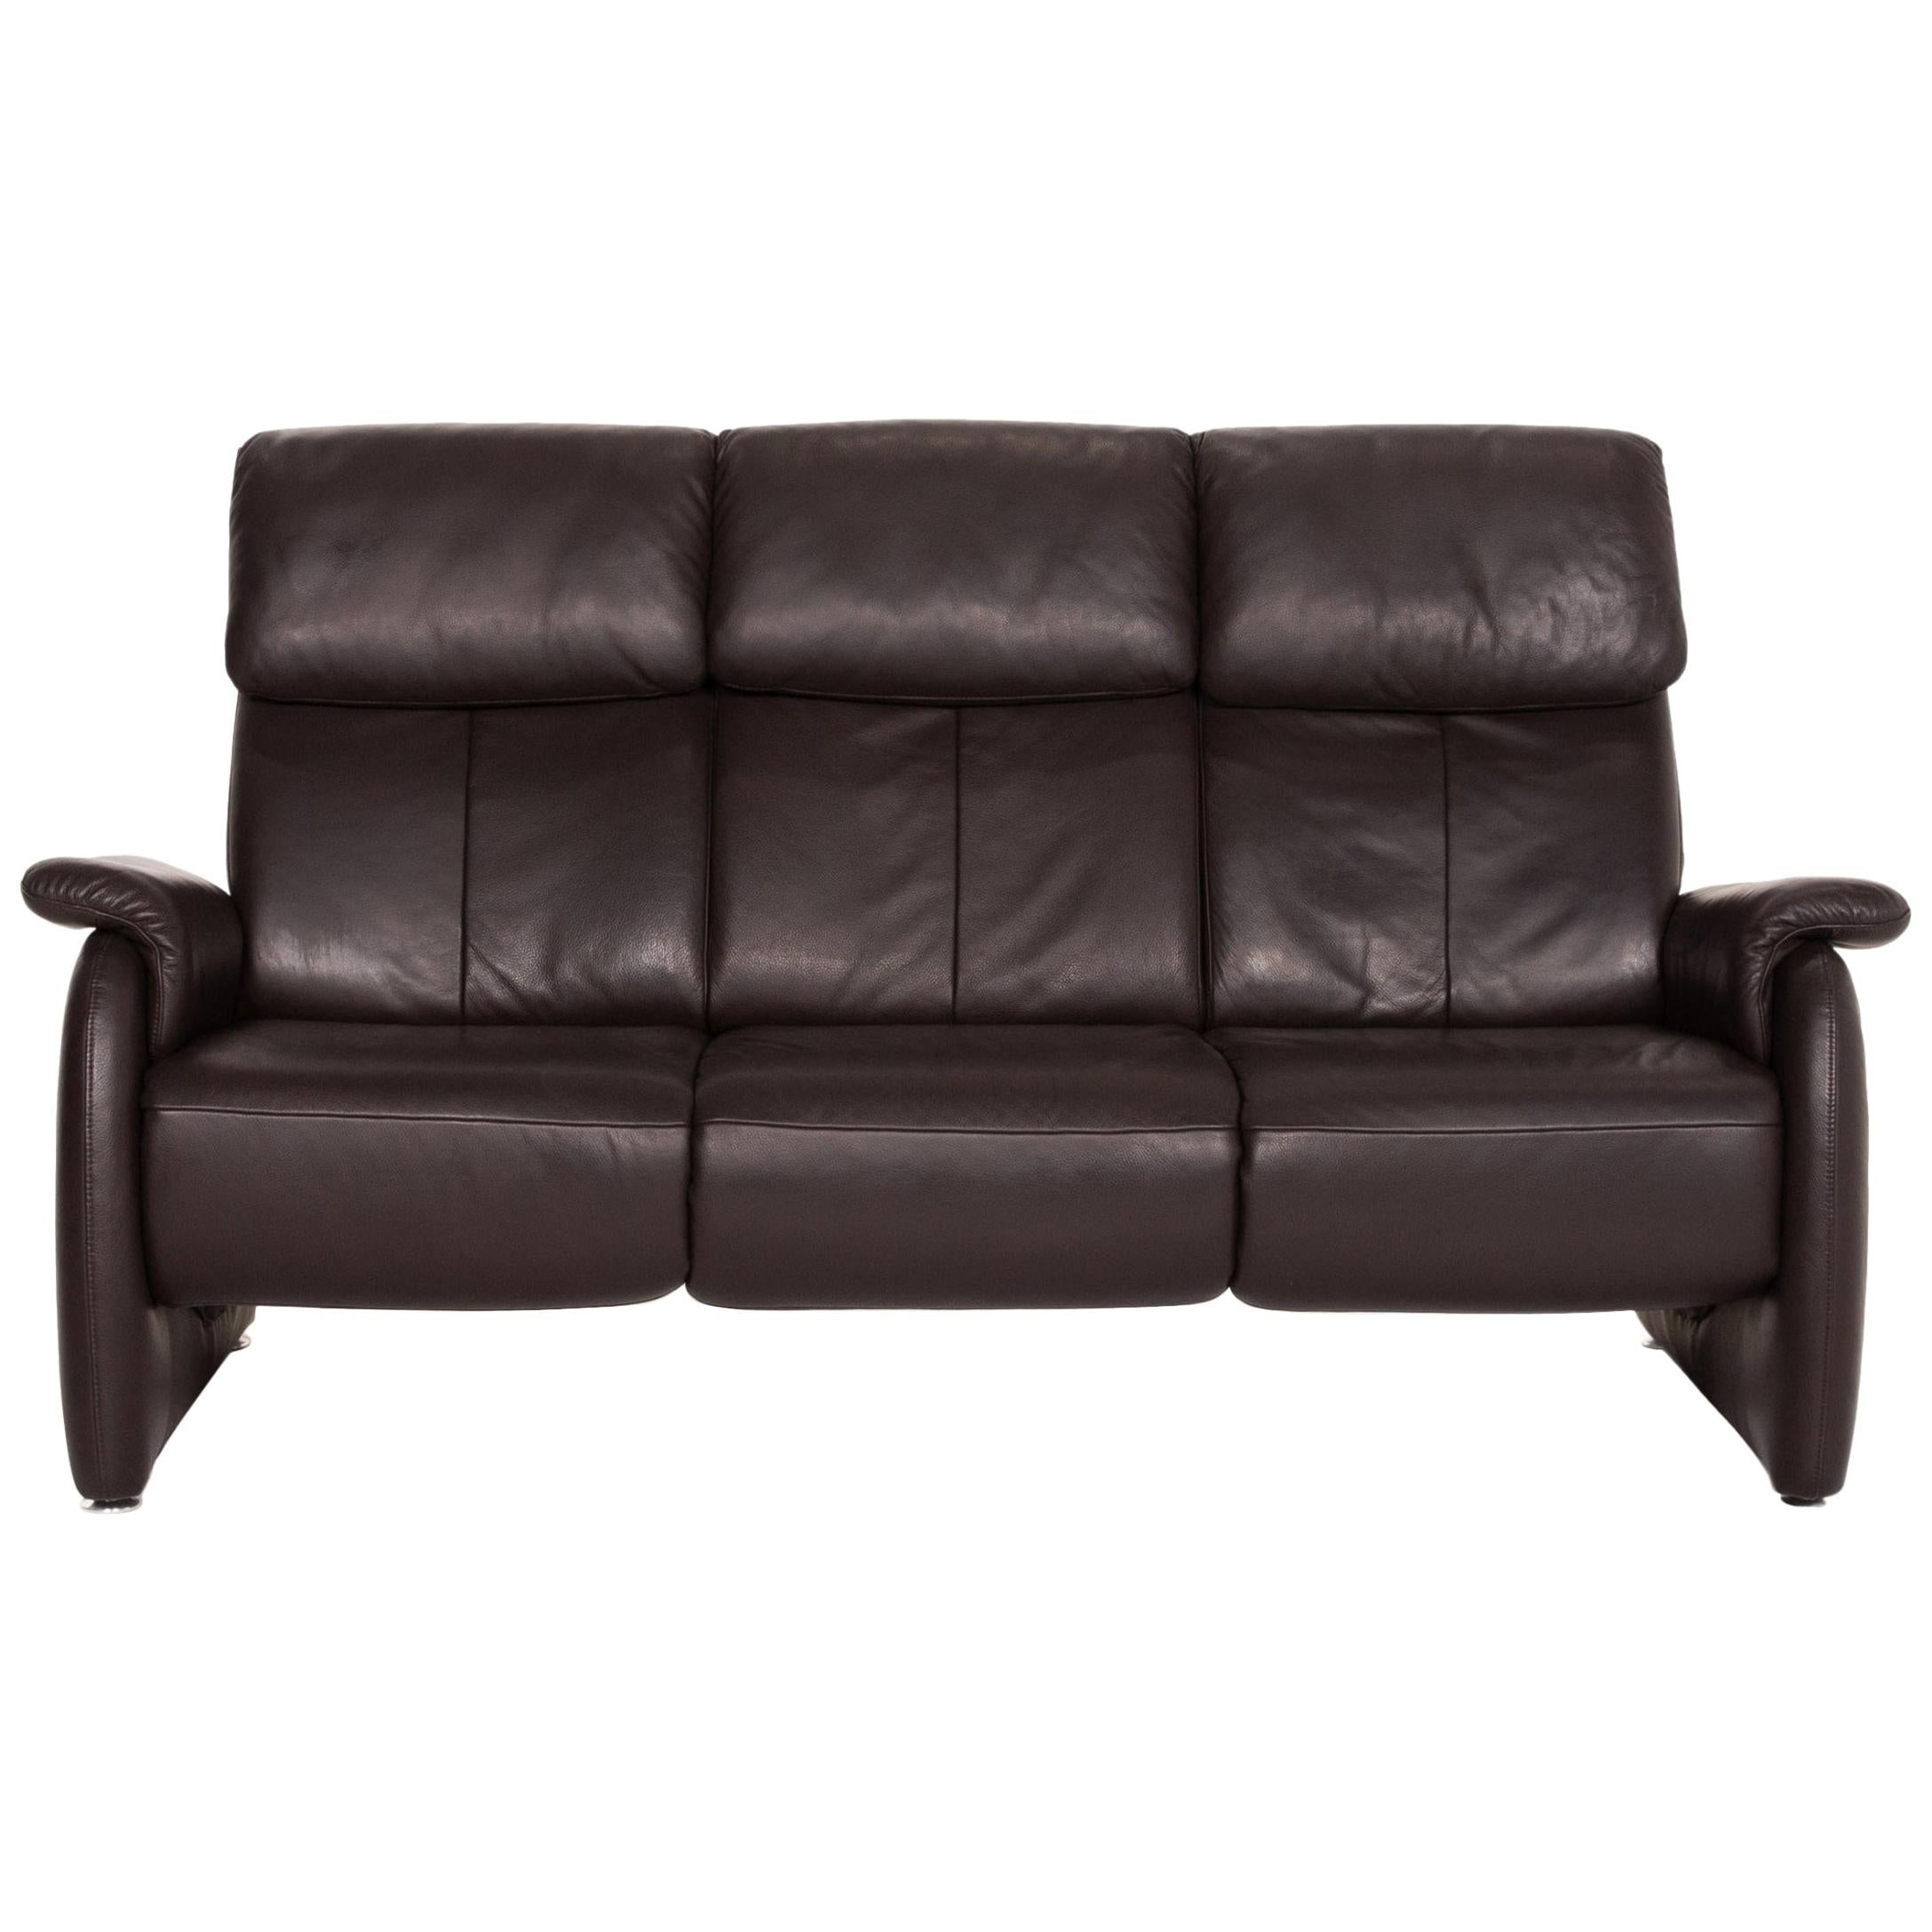 Willi Schillig Leather Sofa Brown Dark Brown Three-Seater Couch For Sale